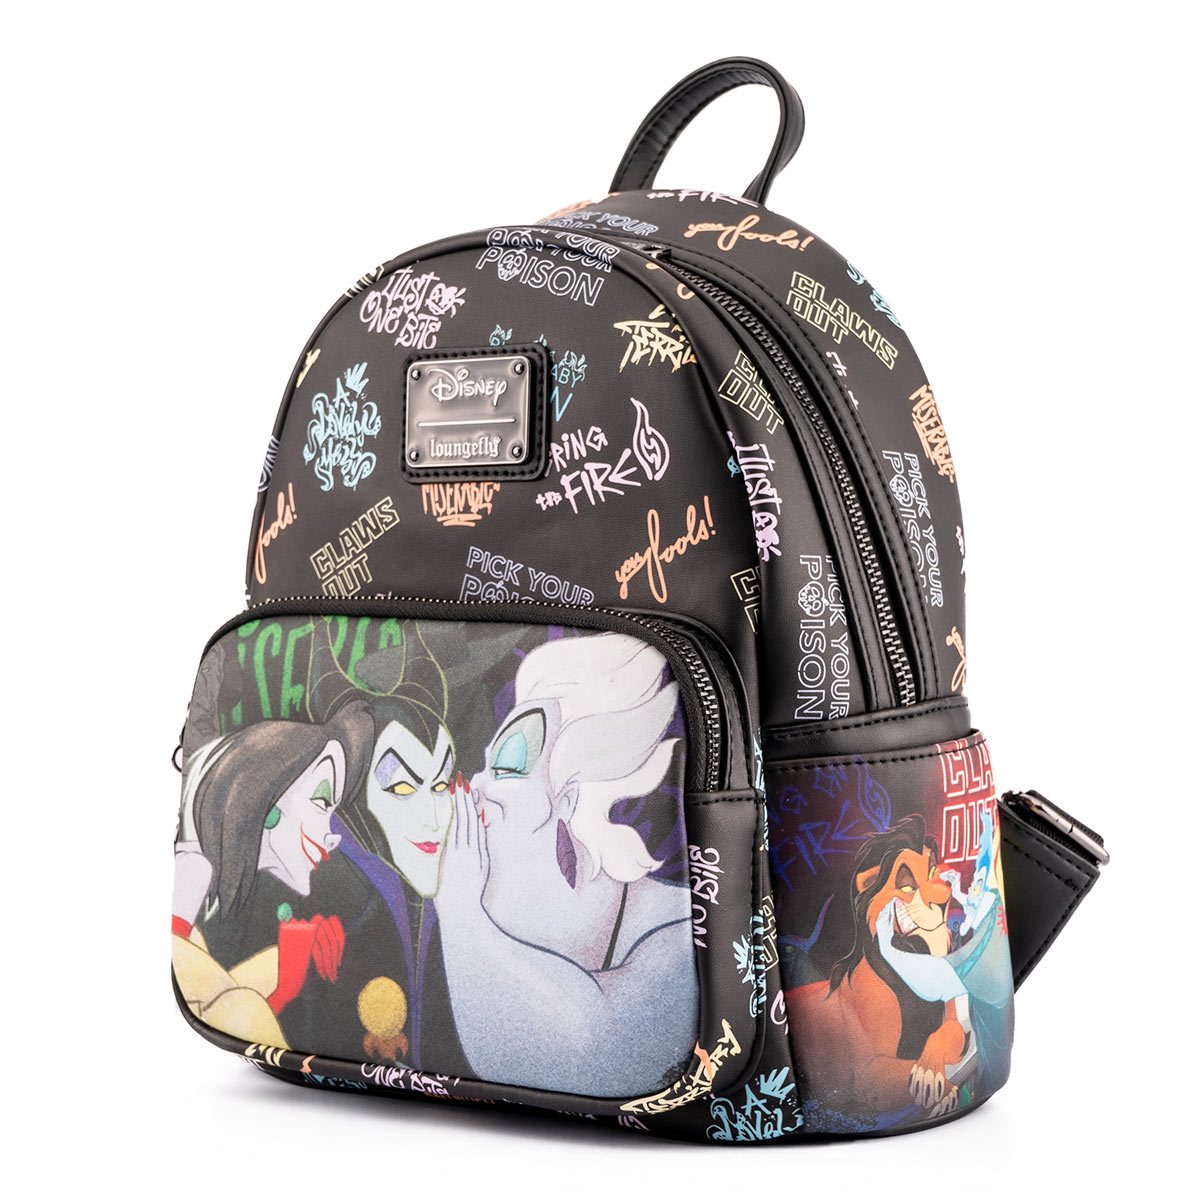 Loungefly Funko Pop! Disney Villains Mini Backpack Brand New and In Stock